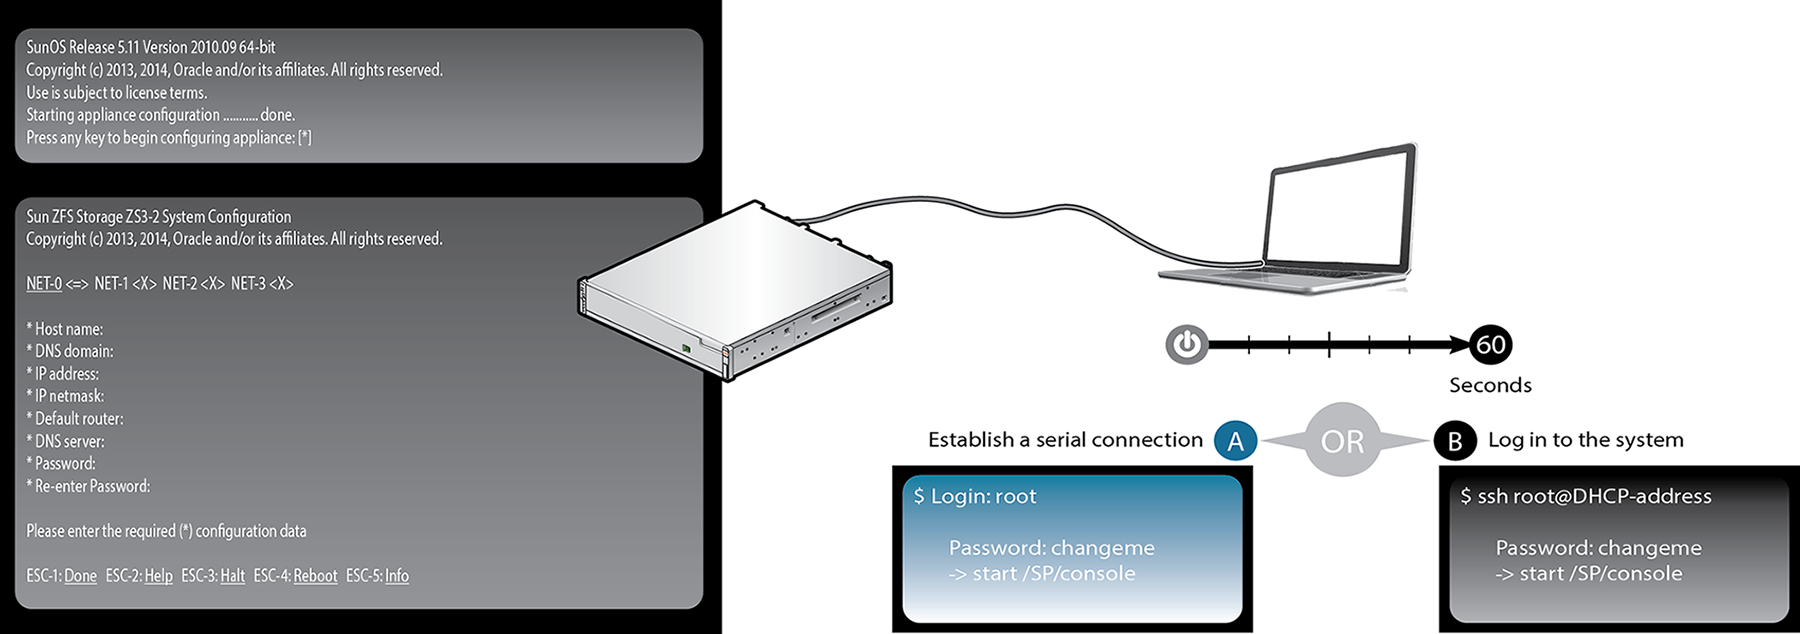 image:The graphic shows how to power on system and configure                                         primary network interface.